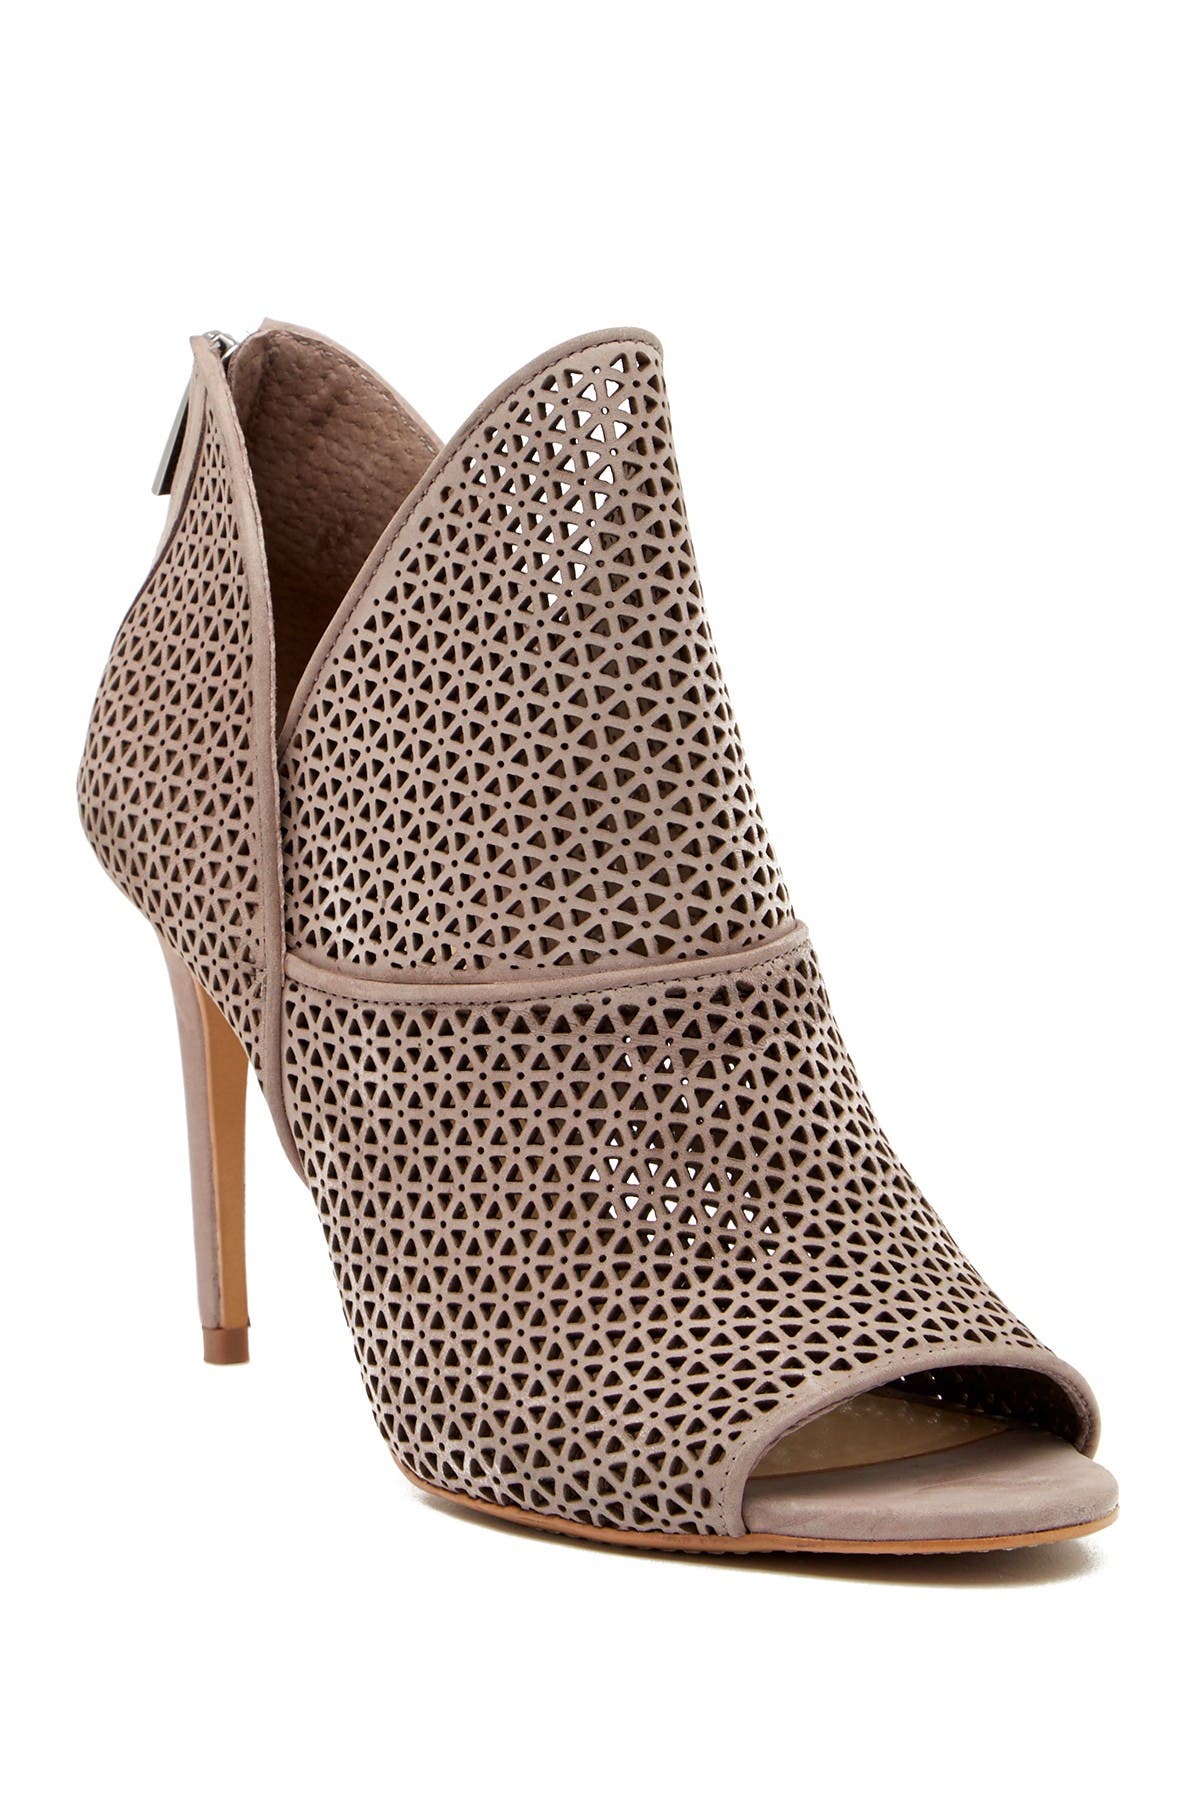 Vince Camuto | Vatena Perforated 